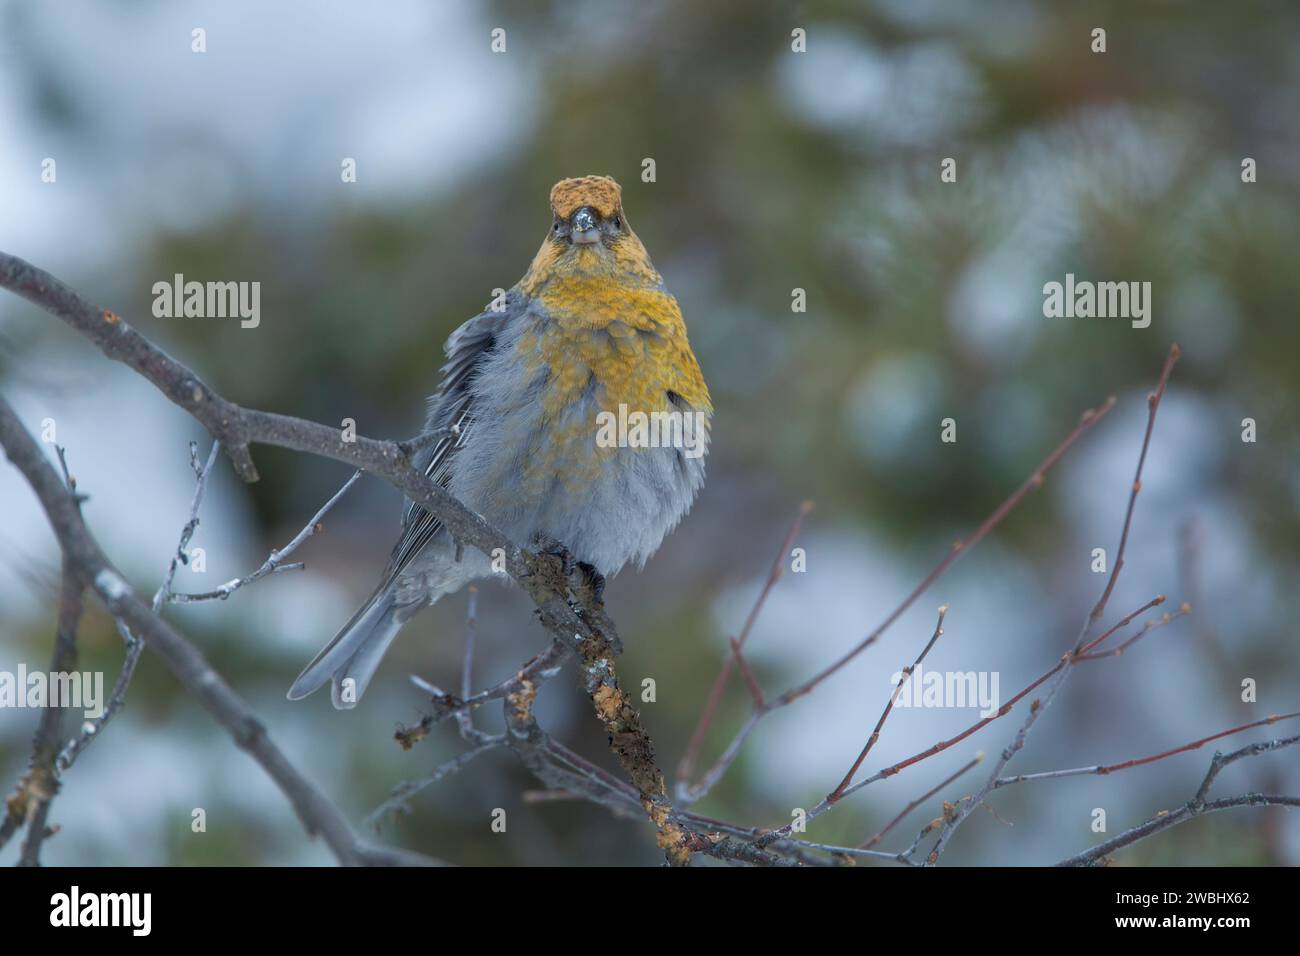 Female pine grosbeak (Pinicola enucleator) perched on a thin branch against snow on pine trees, showing details of front plumage in soft light.  Borea Stock Photo